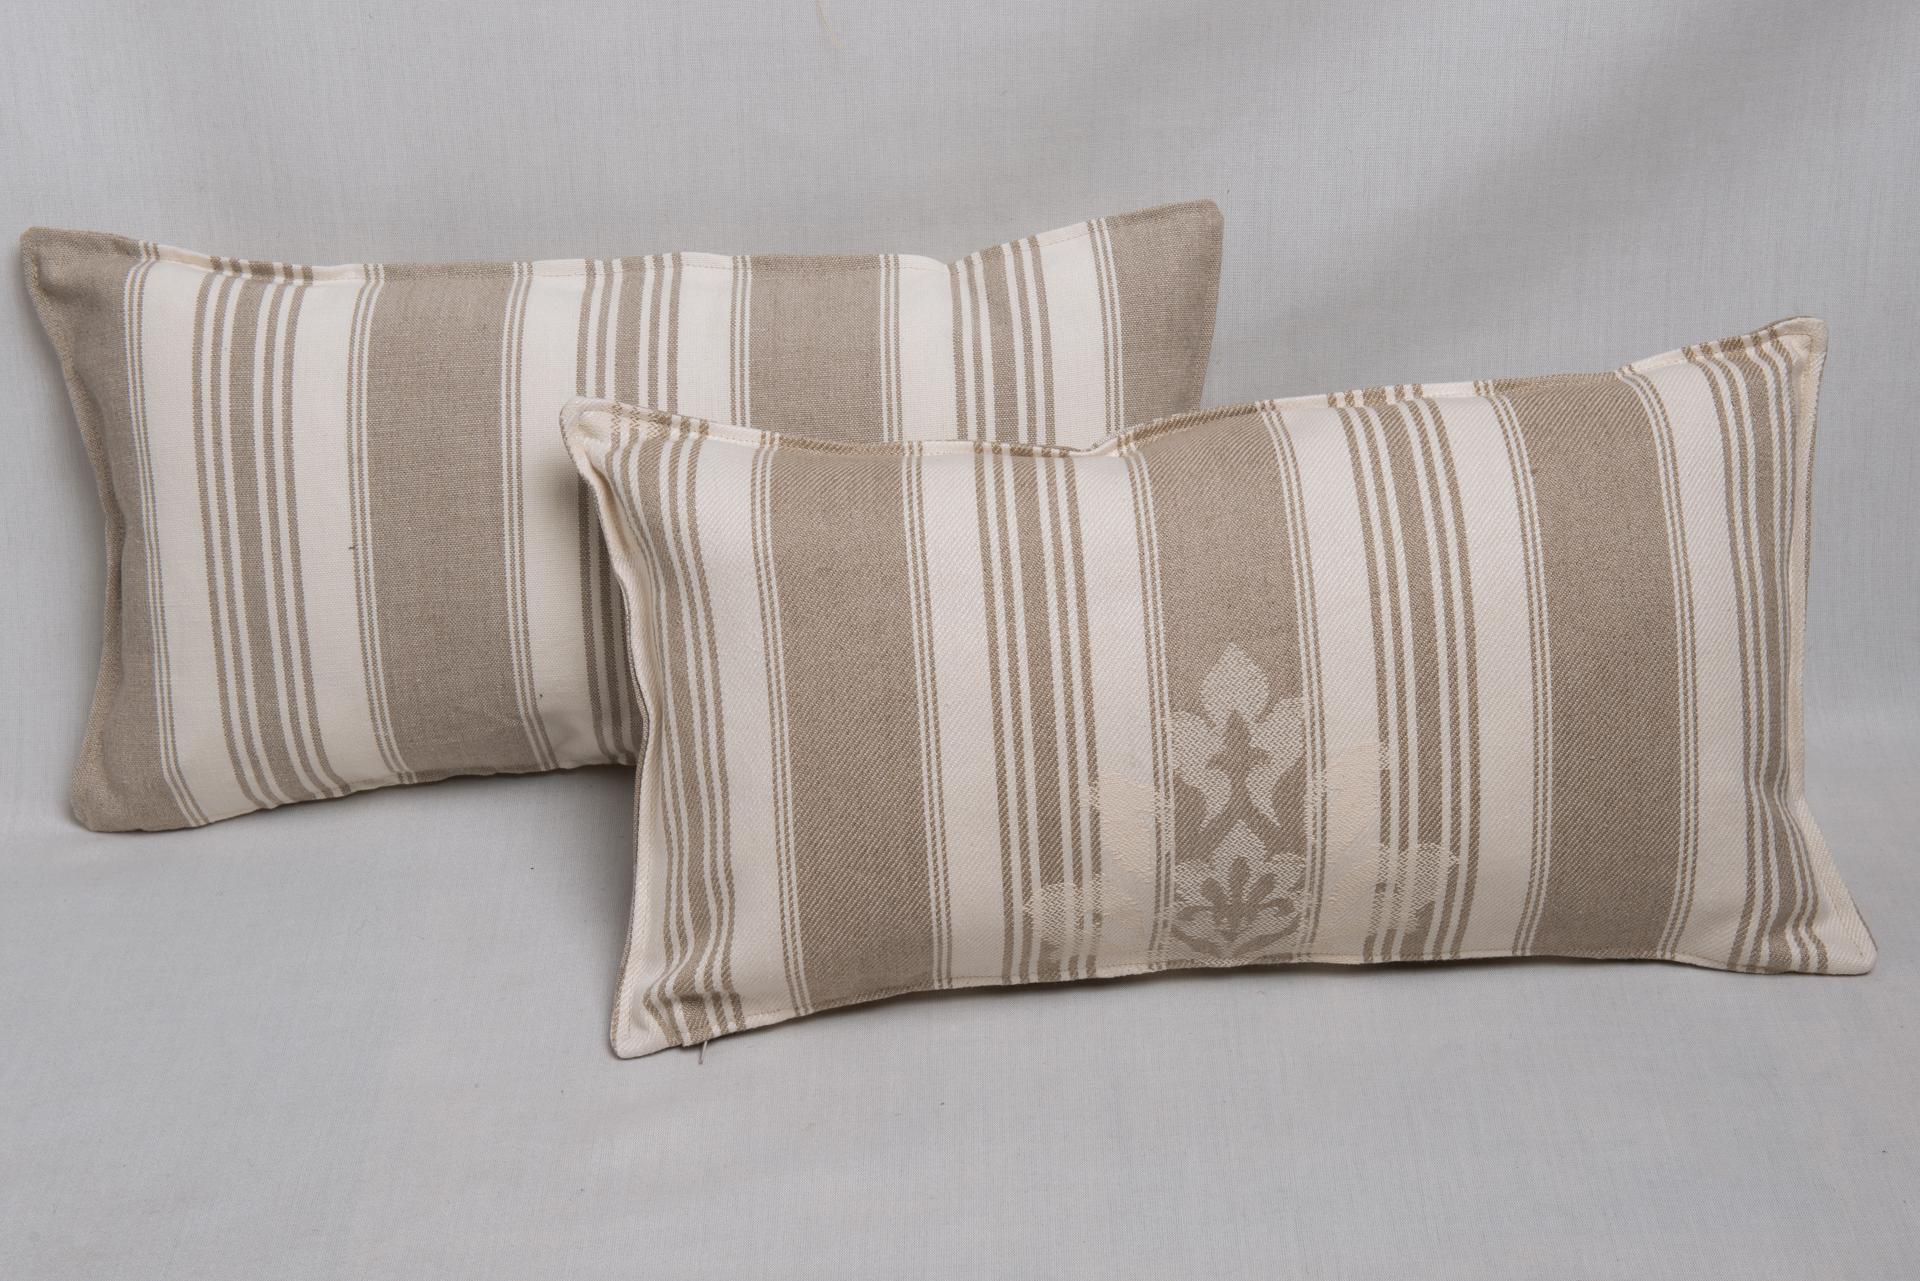 B/2443 -  Pair of casual long pillows in un-dyed cotton. One time this tissue was used in Italy for matresses, so it is called mattress linen. It is simple and robust, it has an innate elegance of old tradition.